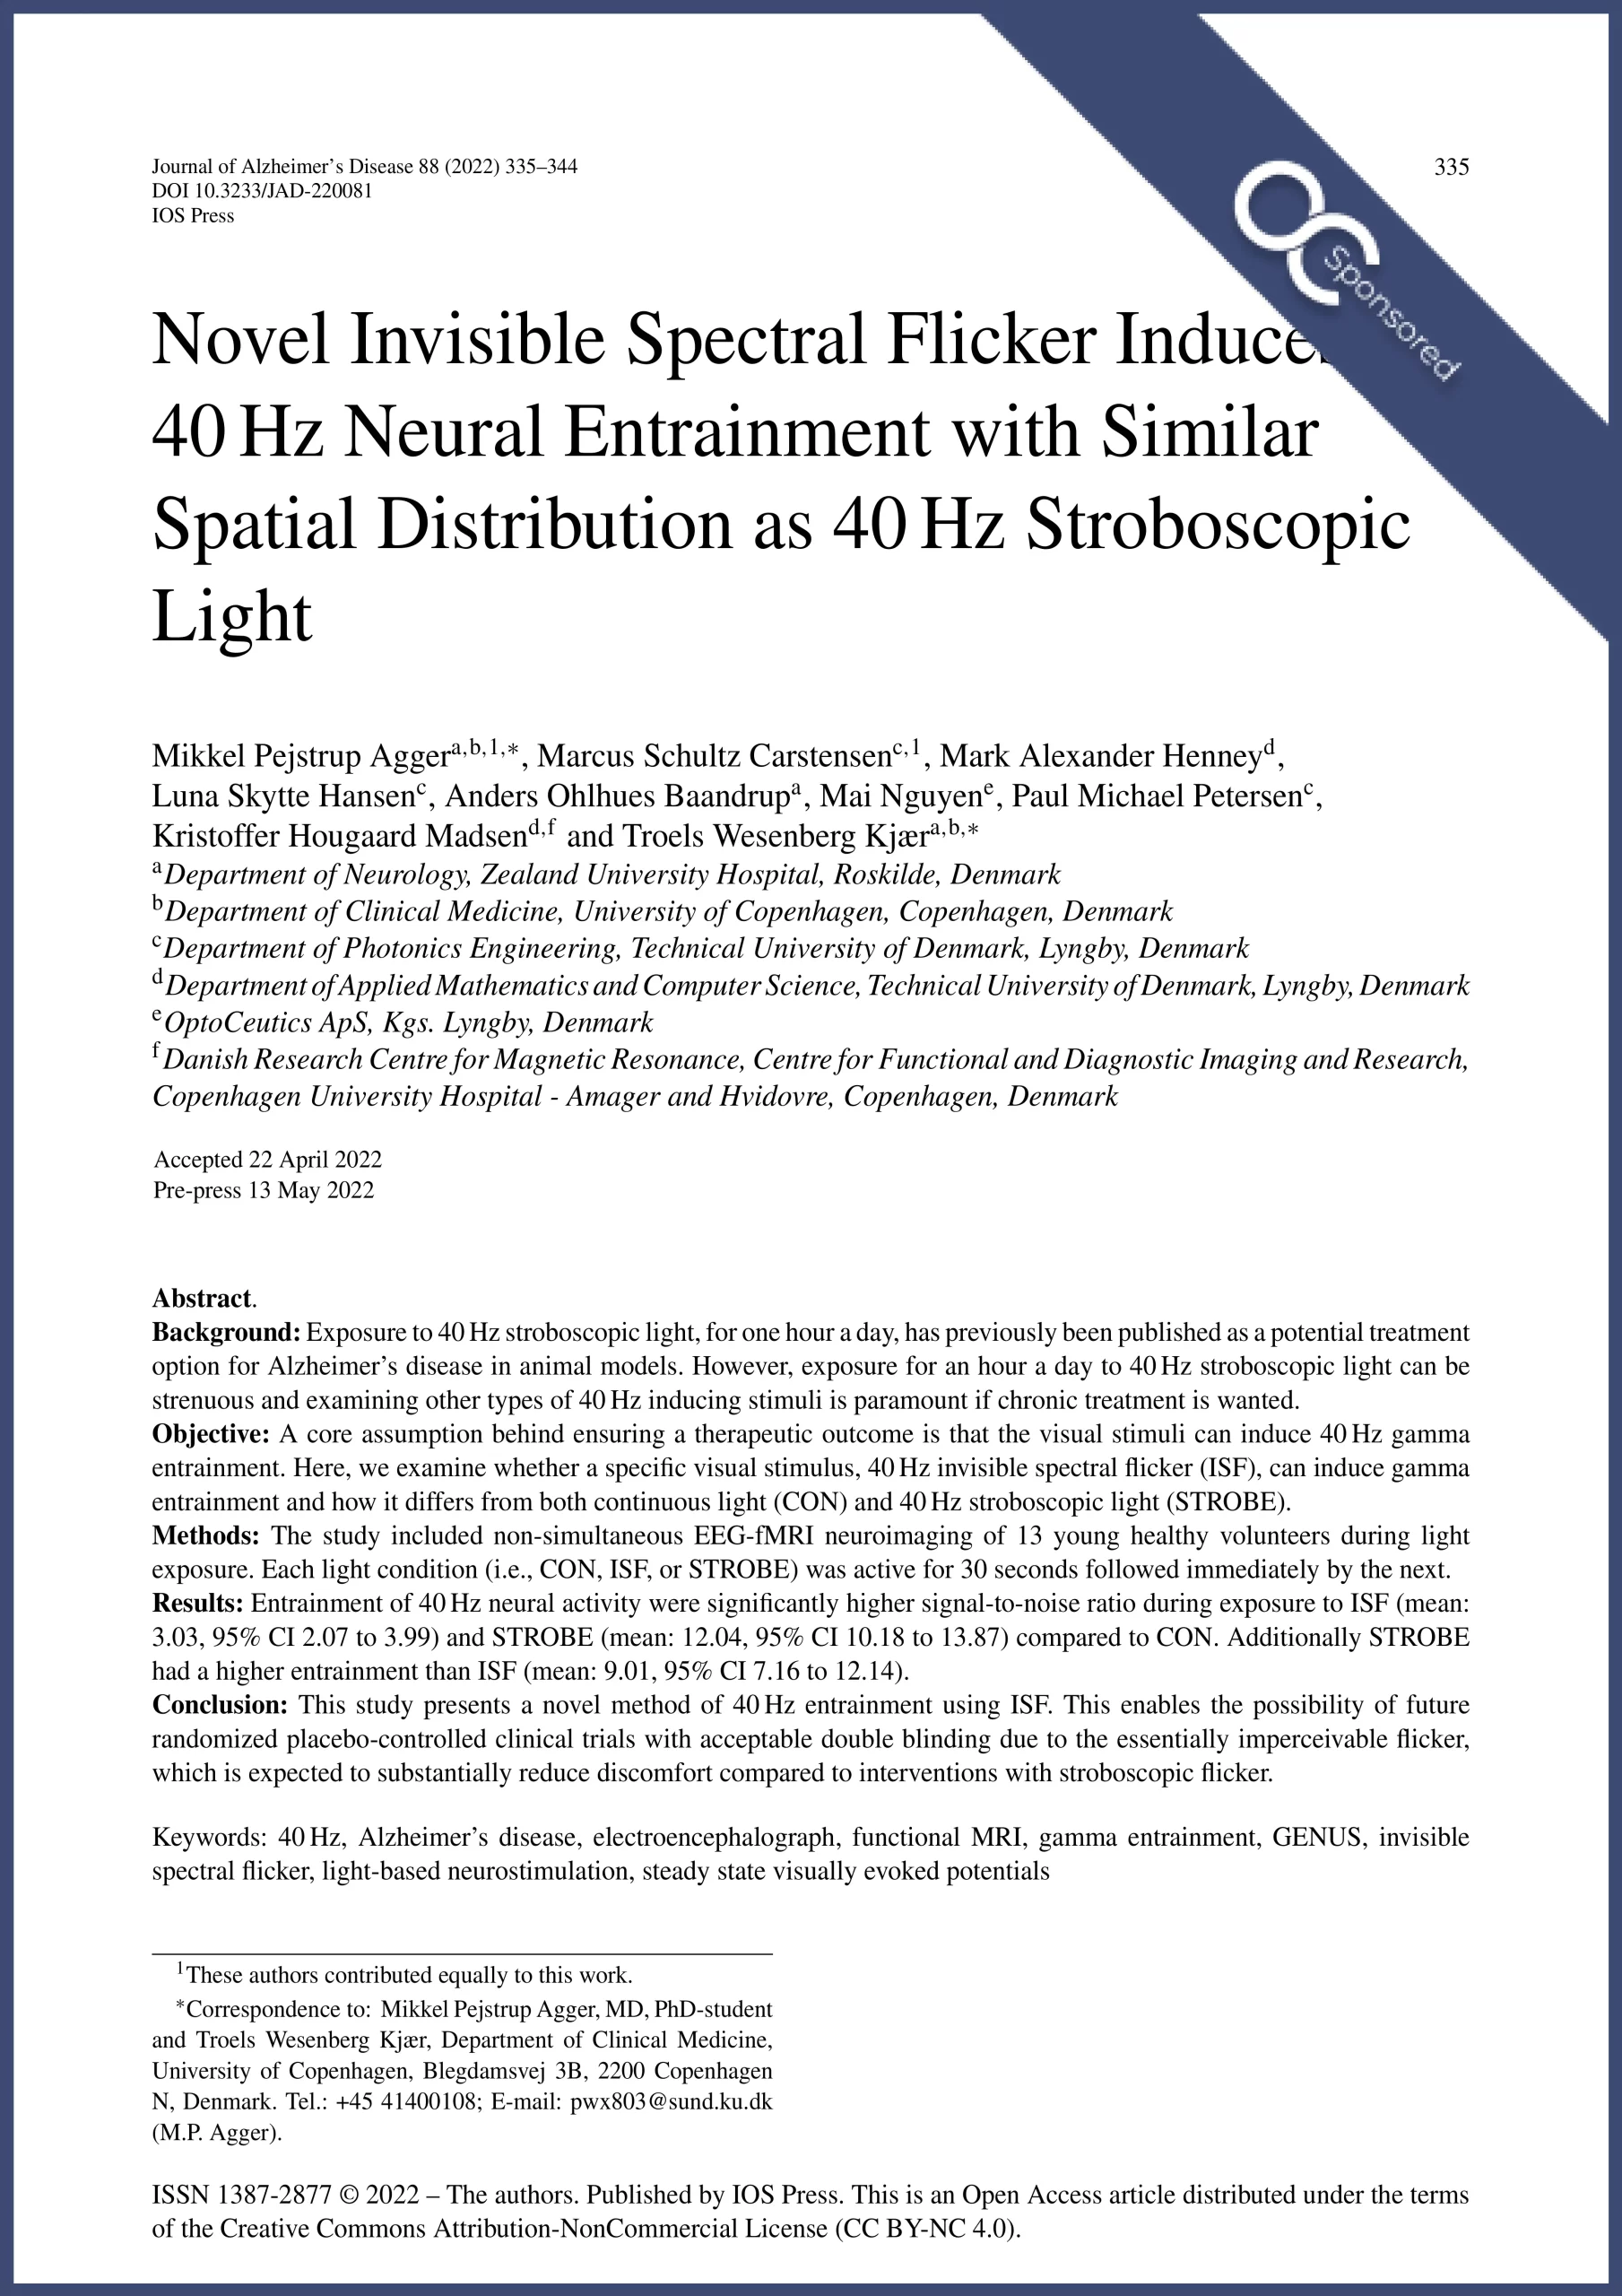 Novel Invisible Spectral Flicker Induce 40 Hz Neural Entrainment with Similar Spatial Distribution as 40 Hz Stroboscopic Light publication by Agger 2022 sponsored by Optoceutics